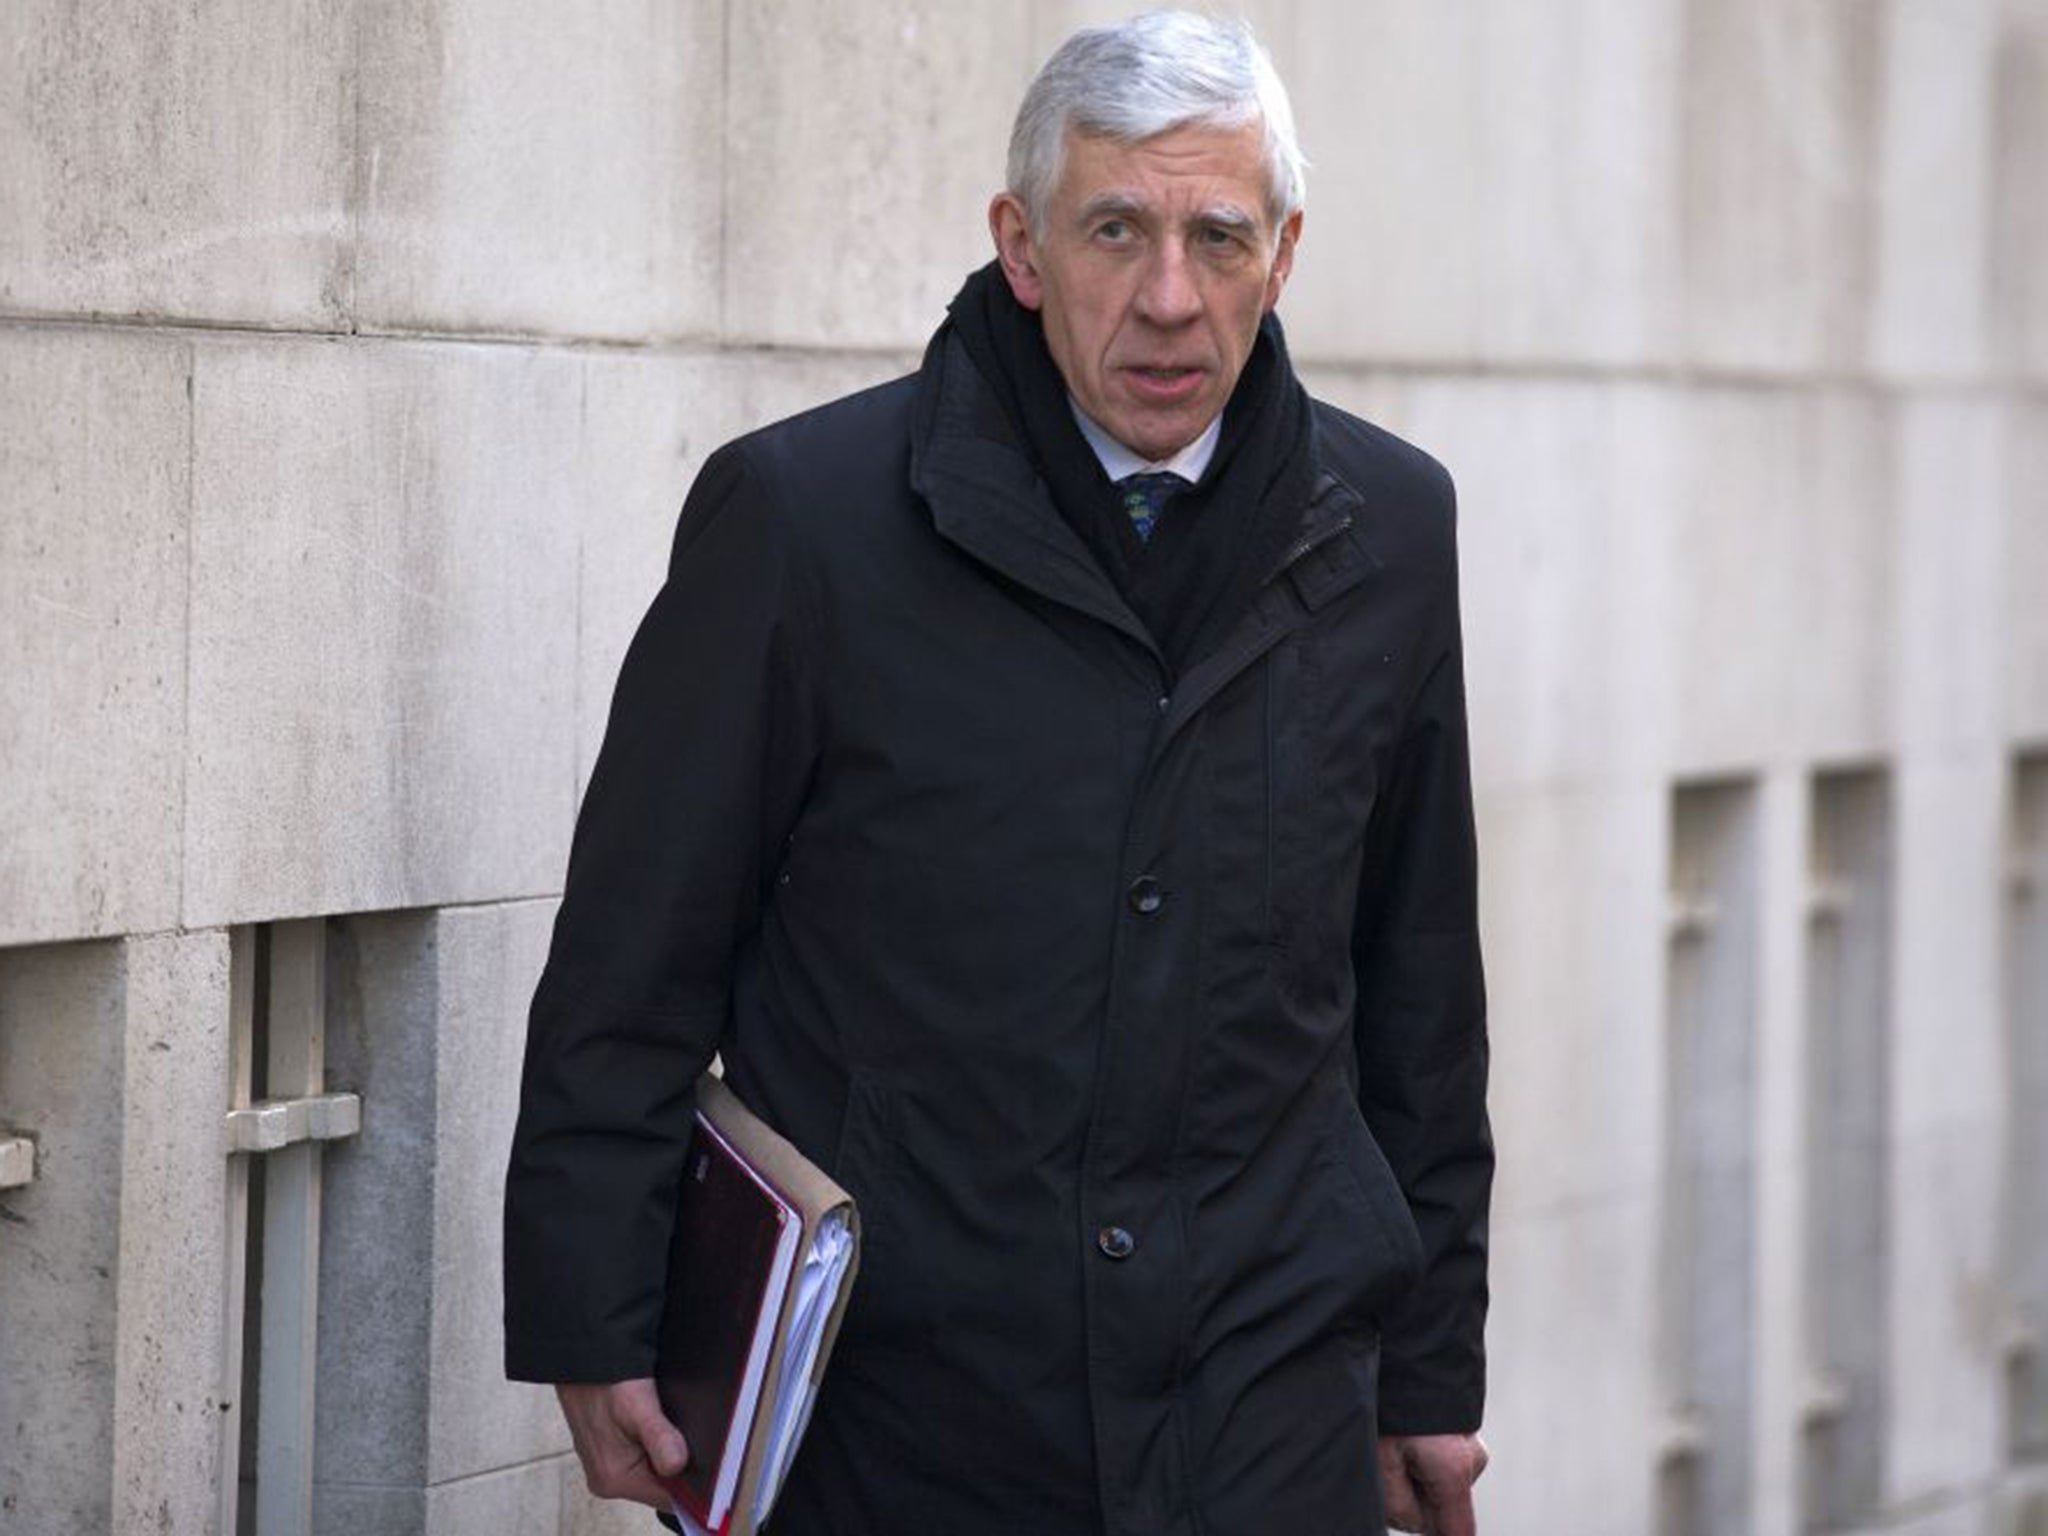 Labour have suspended Jack Straw